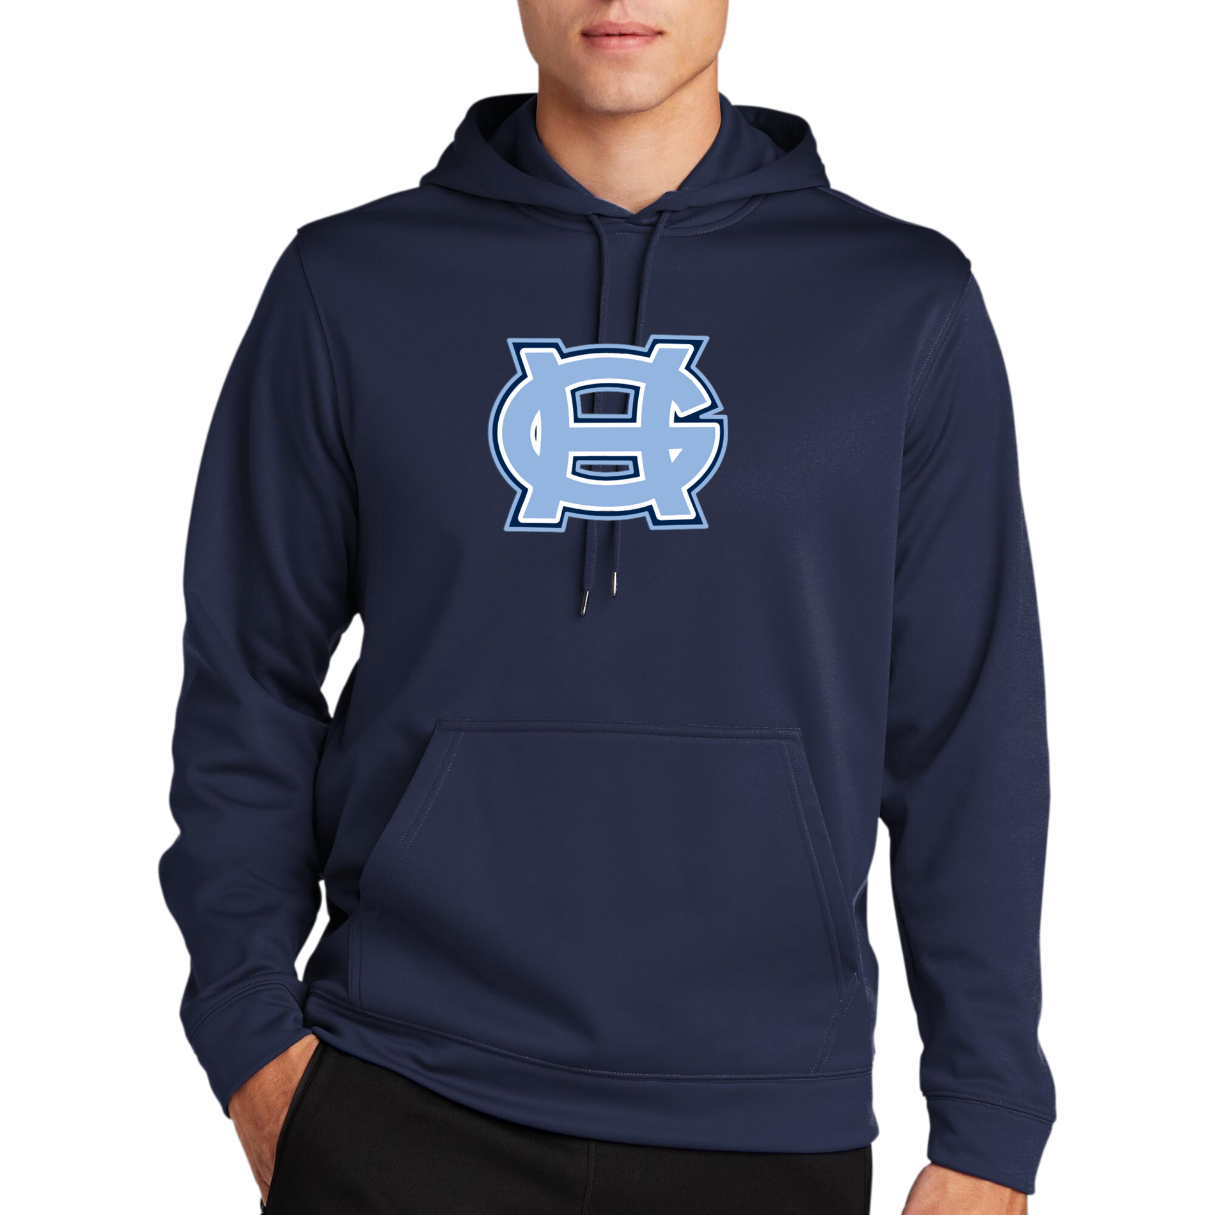 Classic GH Performance Hooded Sweatshirt - Adult and Youth